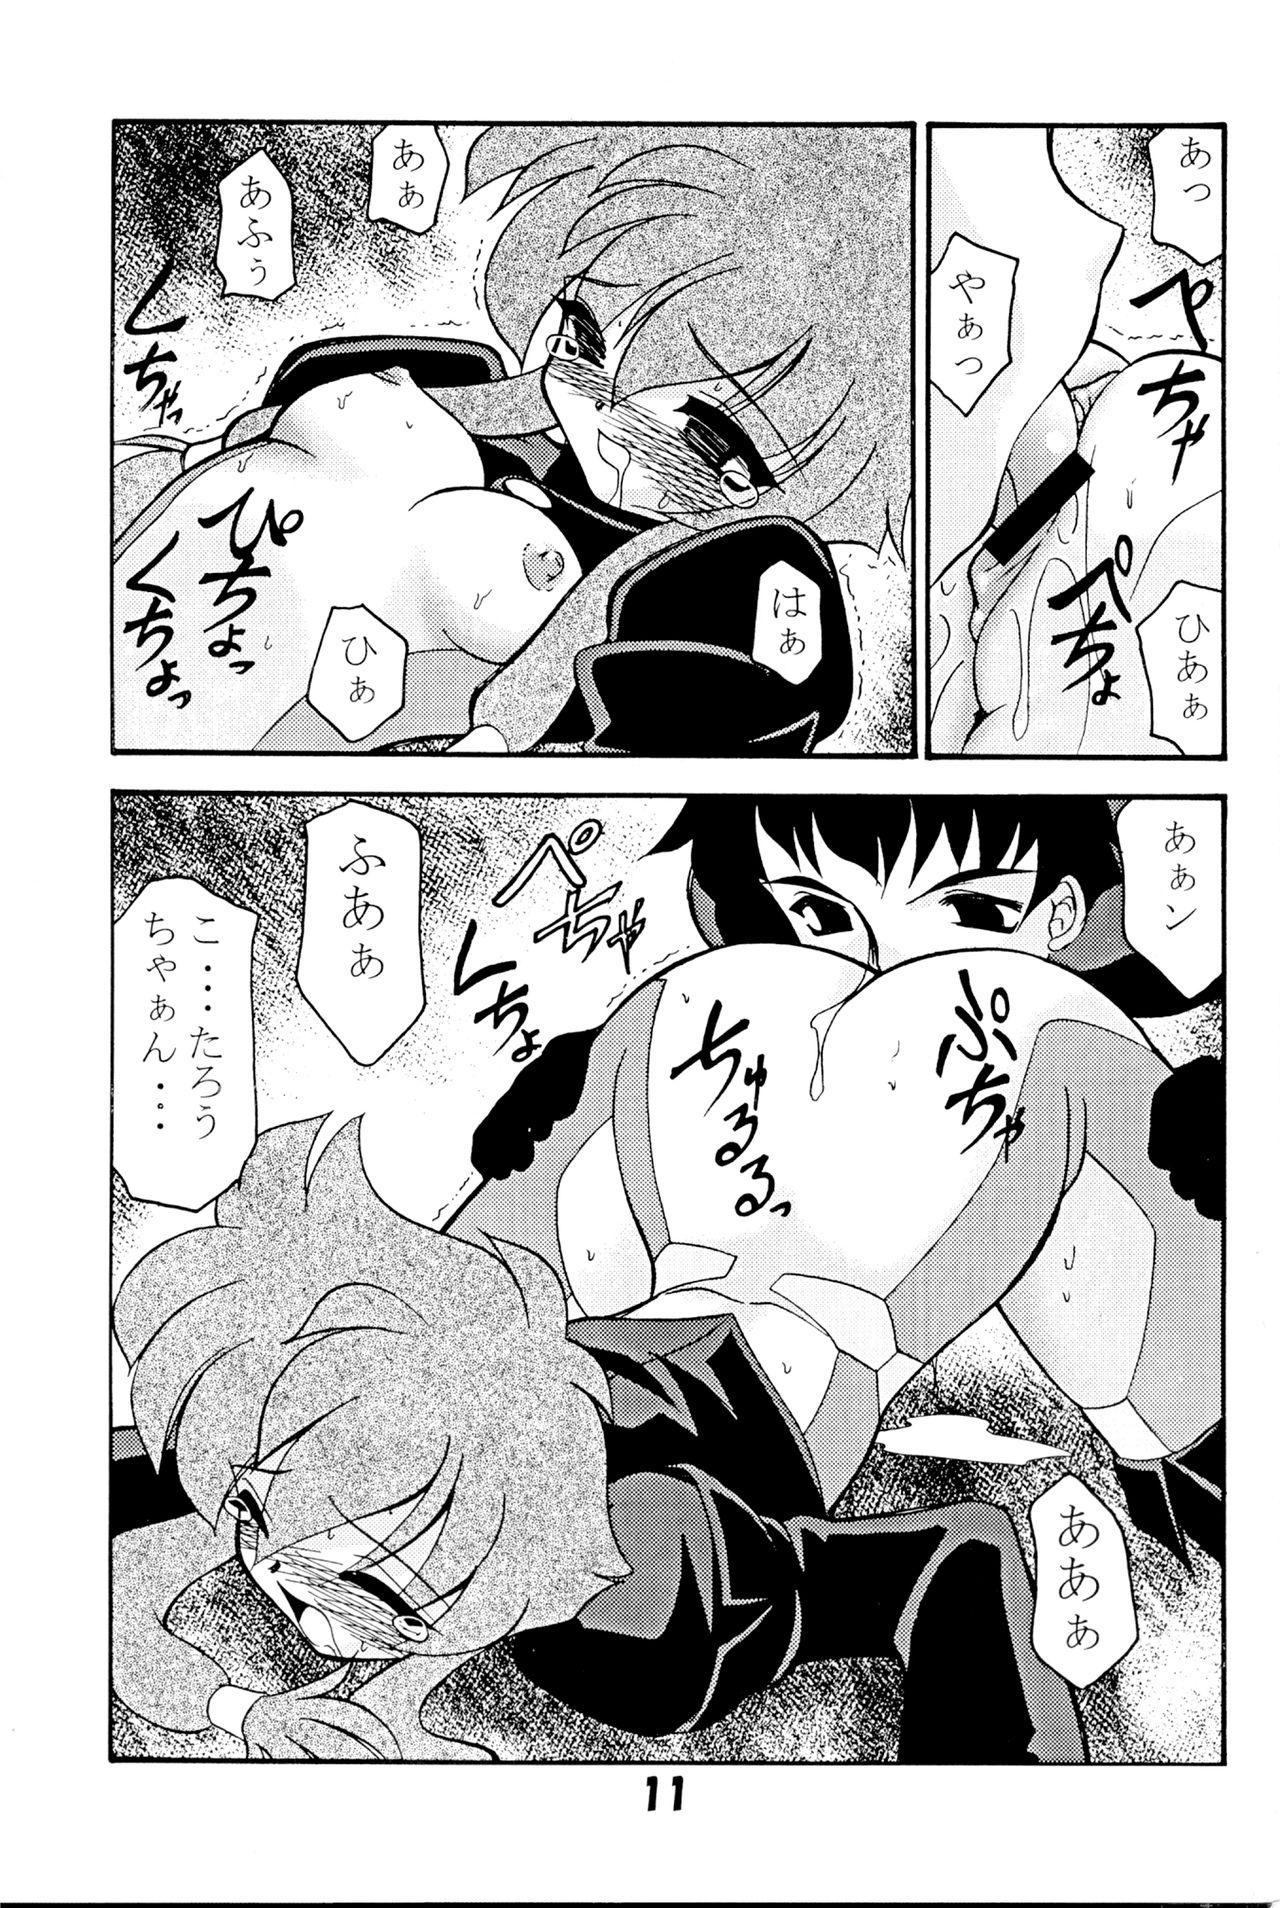 Pervert VERSUS - Magic knight rayearth Angelic layer Old Young - Page 10